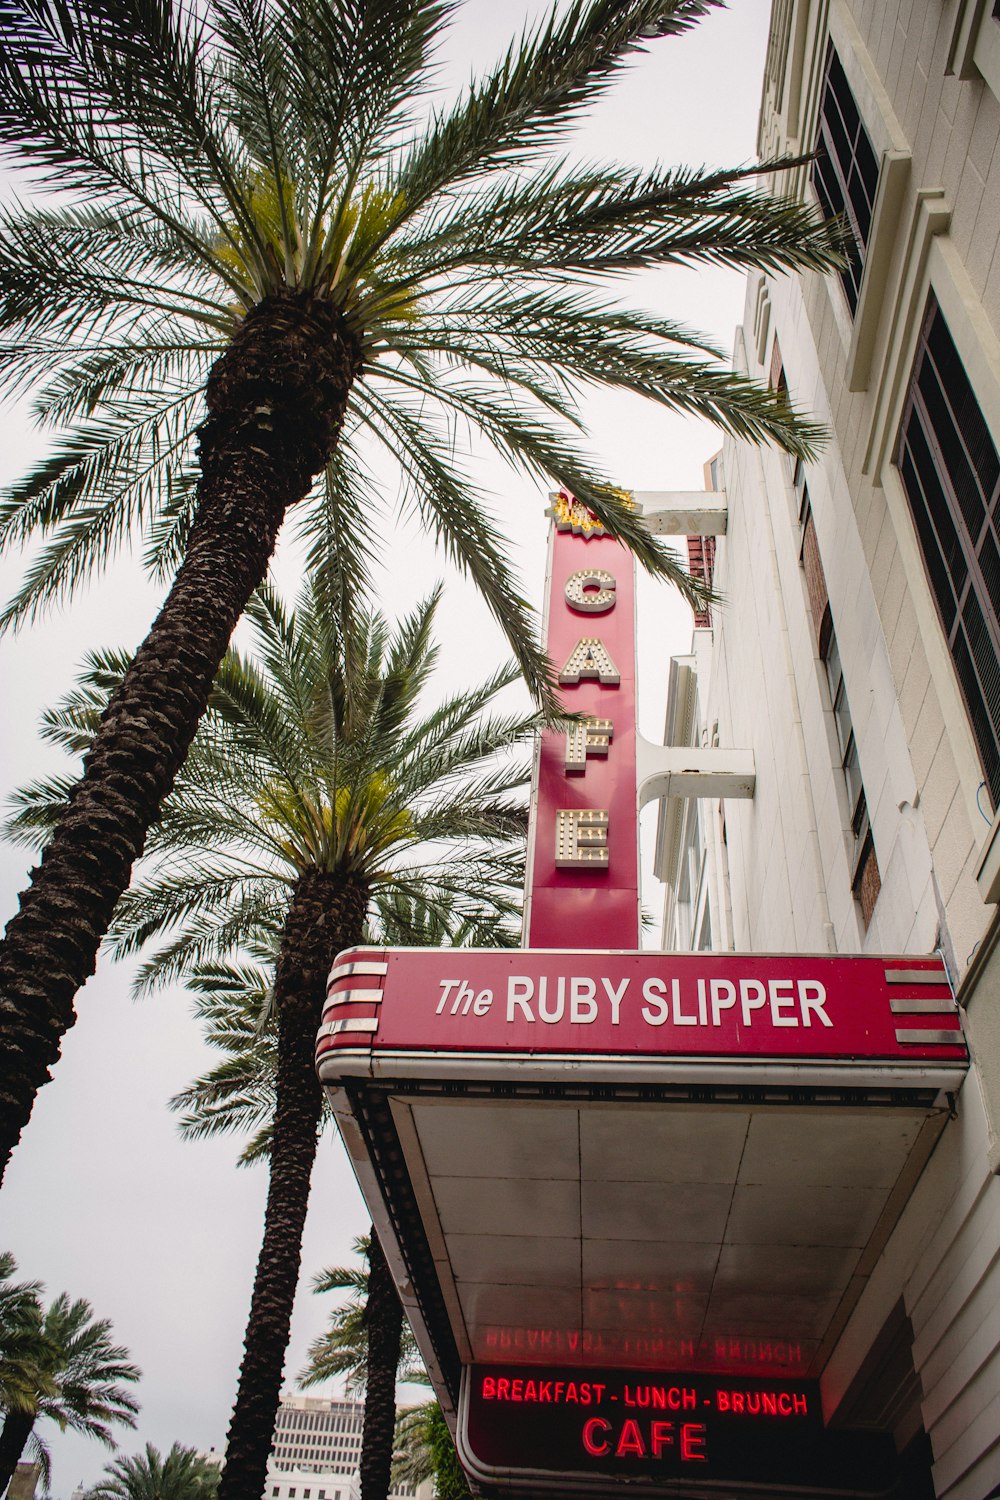 The Ruby Slipper sign